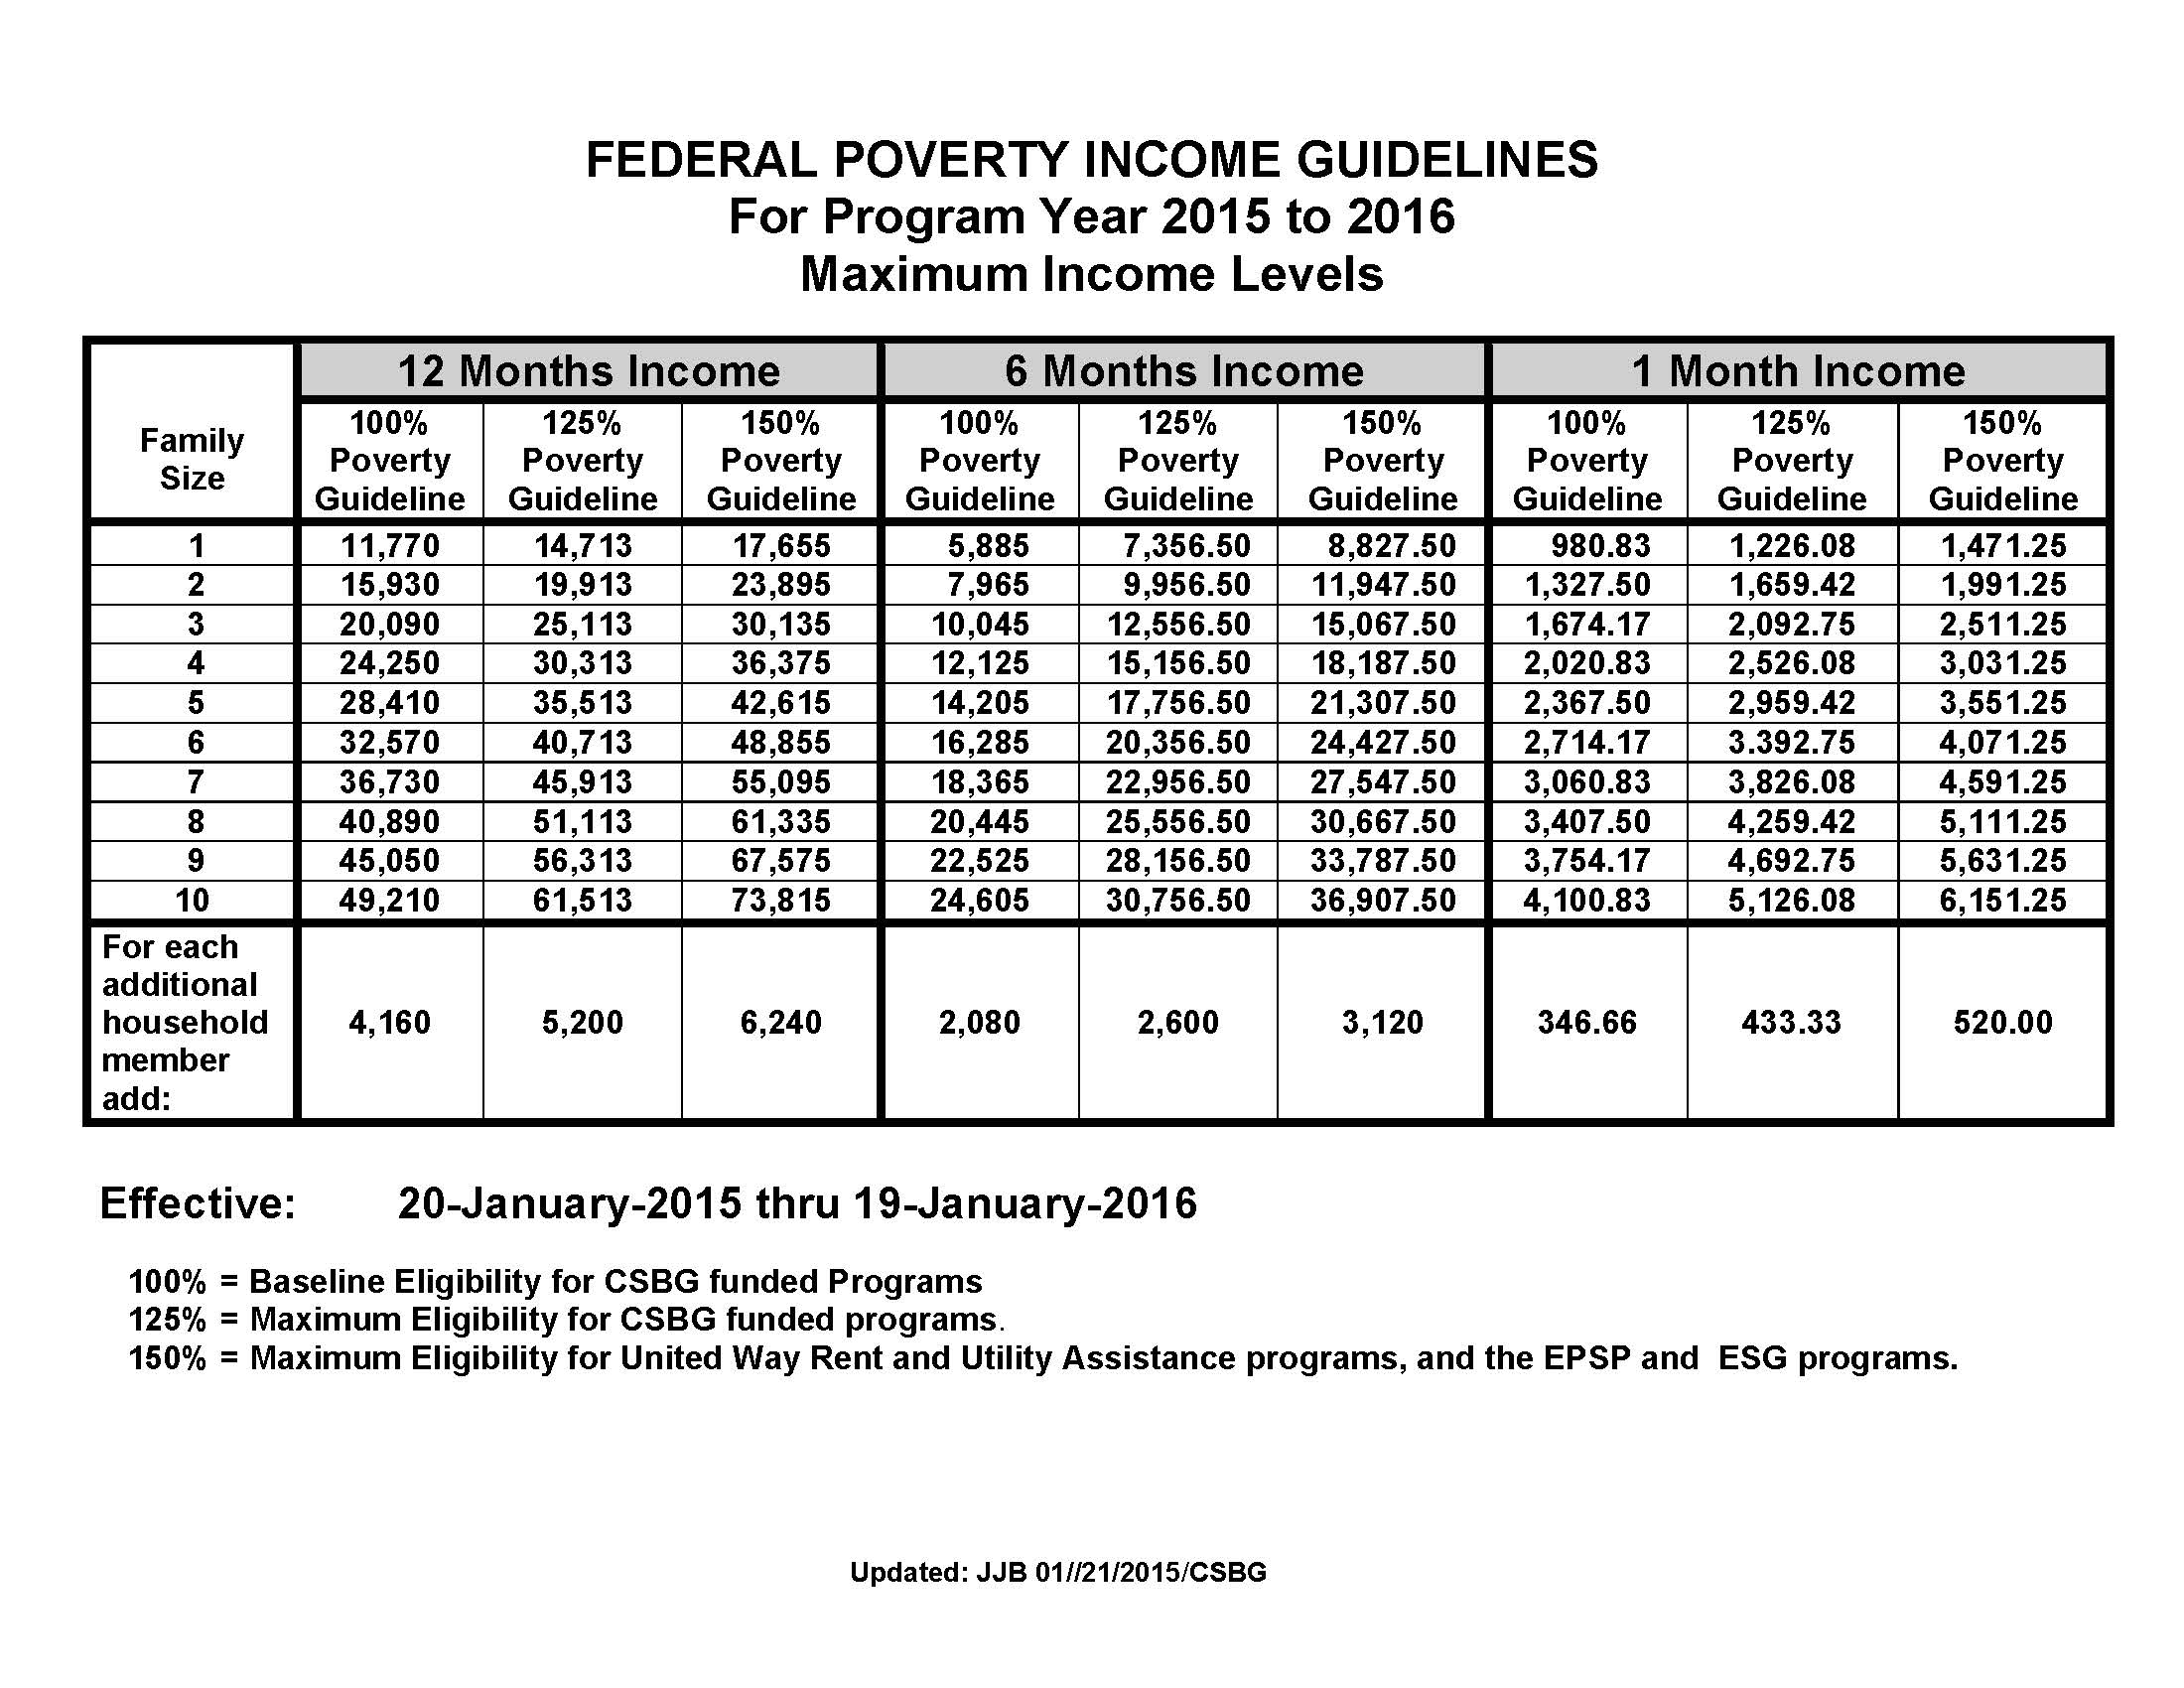 Poverty Guidelines